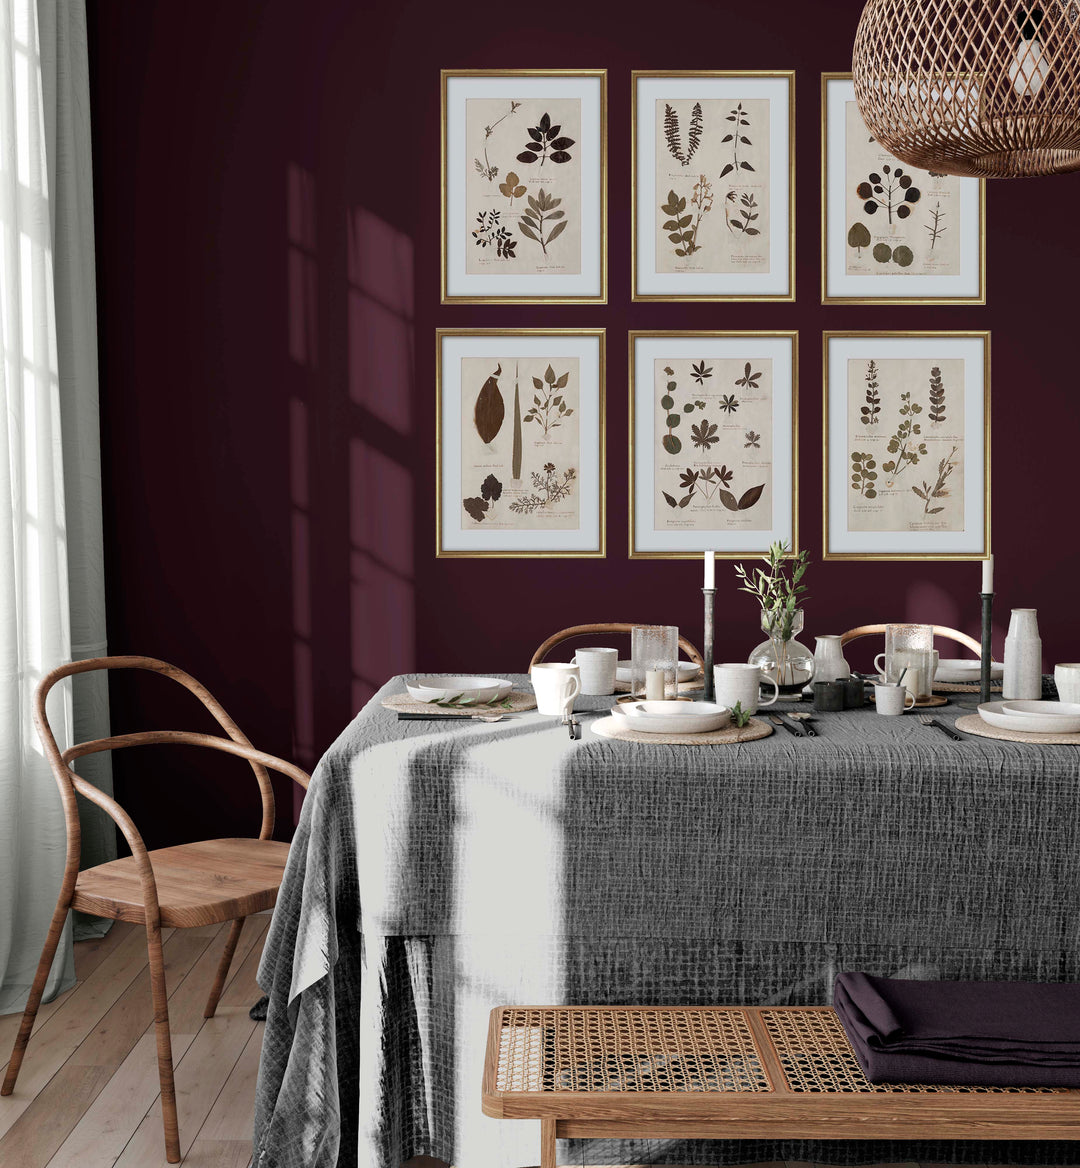 Botanical prints in a dining room against a burgundy red wall